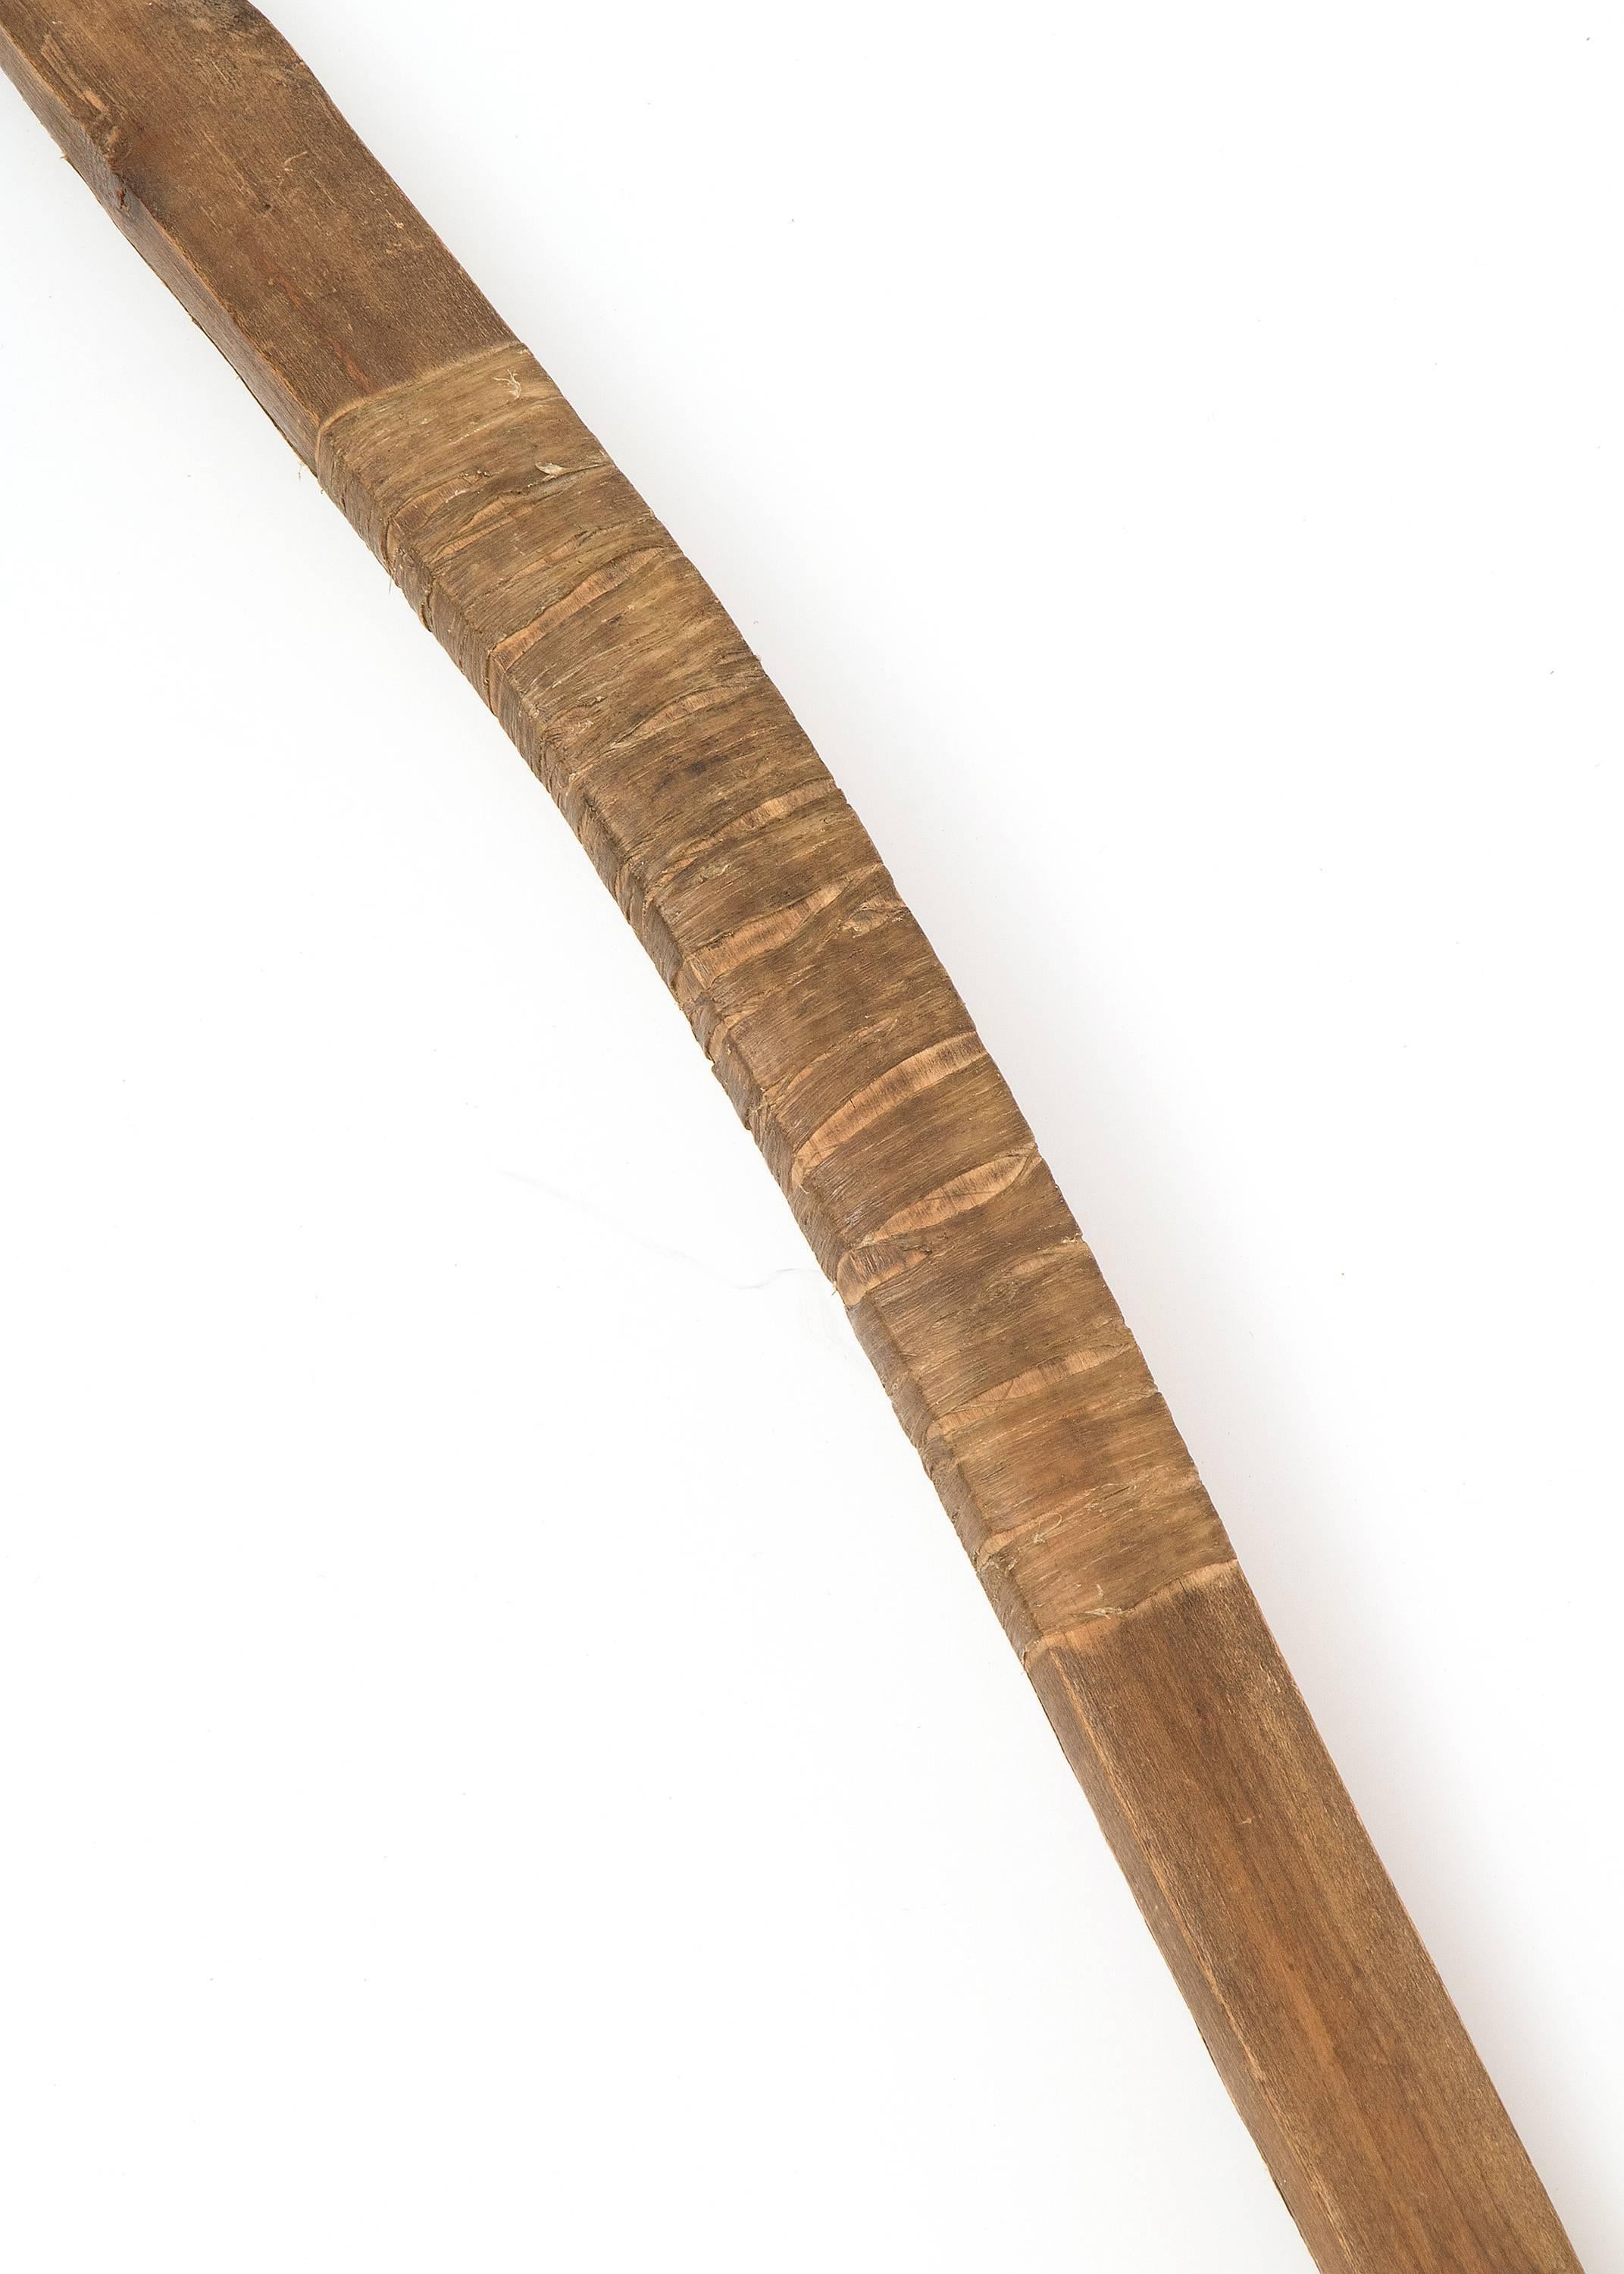 An authentic Plains (North American Indian) bow with pigment and sinew dating to the last quarter of the 19th century (circa 1875-1900).